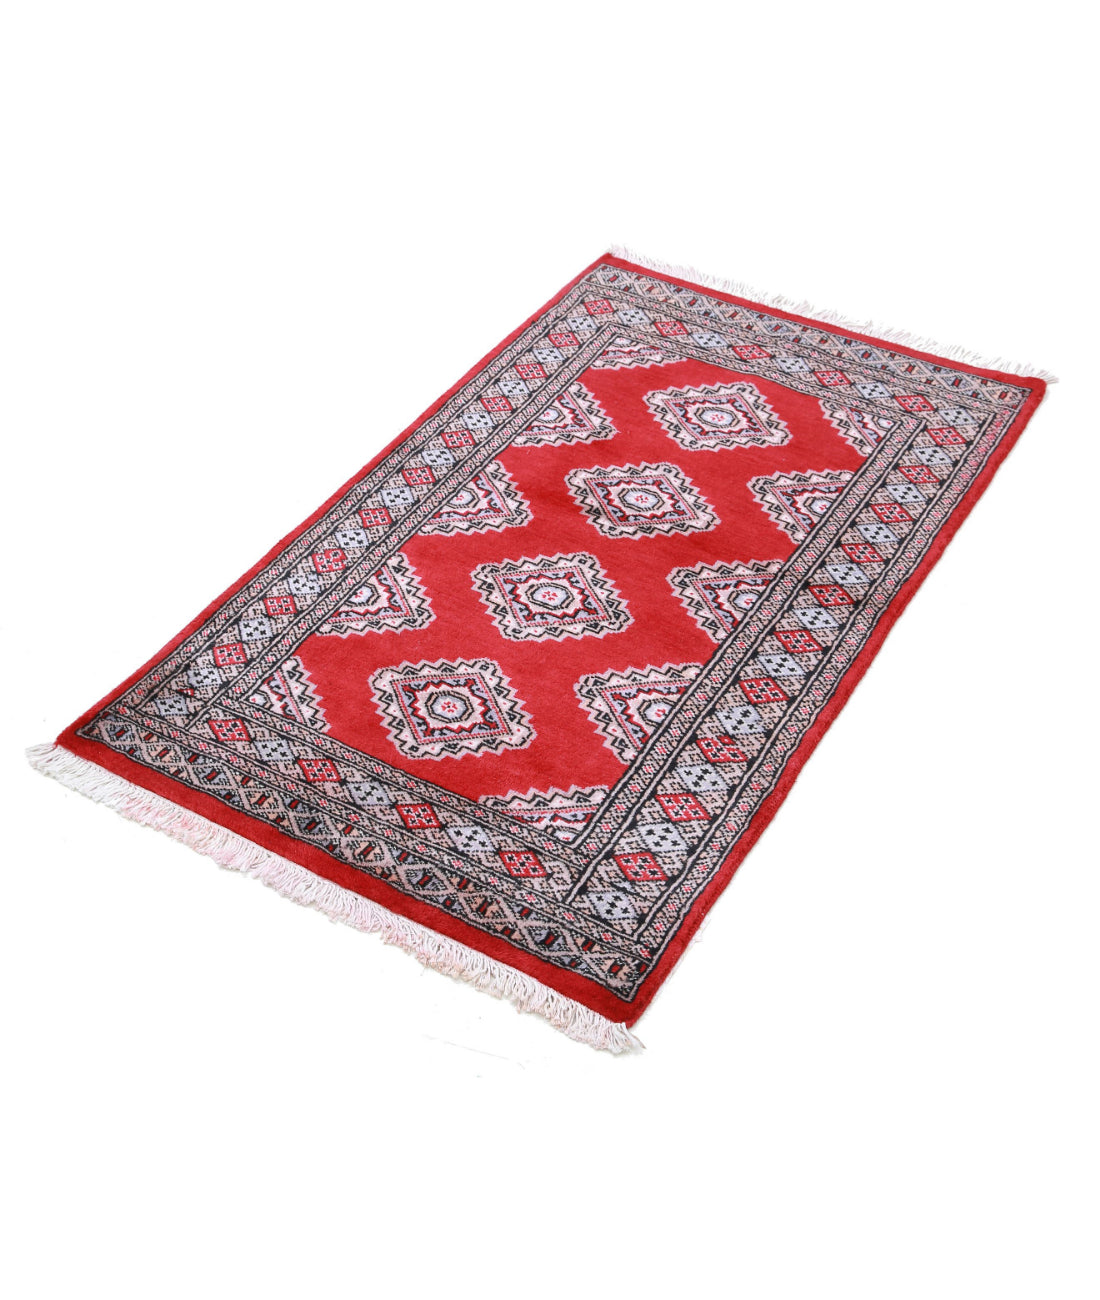 Hand Knotted Tribal Bokhara Wool Rug - 2'6'' x 4'2'' 2'6'' x 4'2'' (75 X 125) / Red / Blue